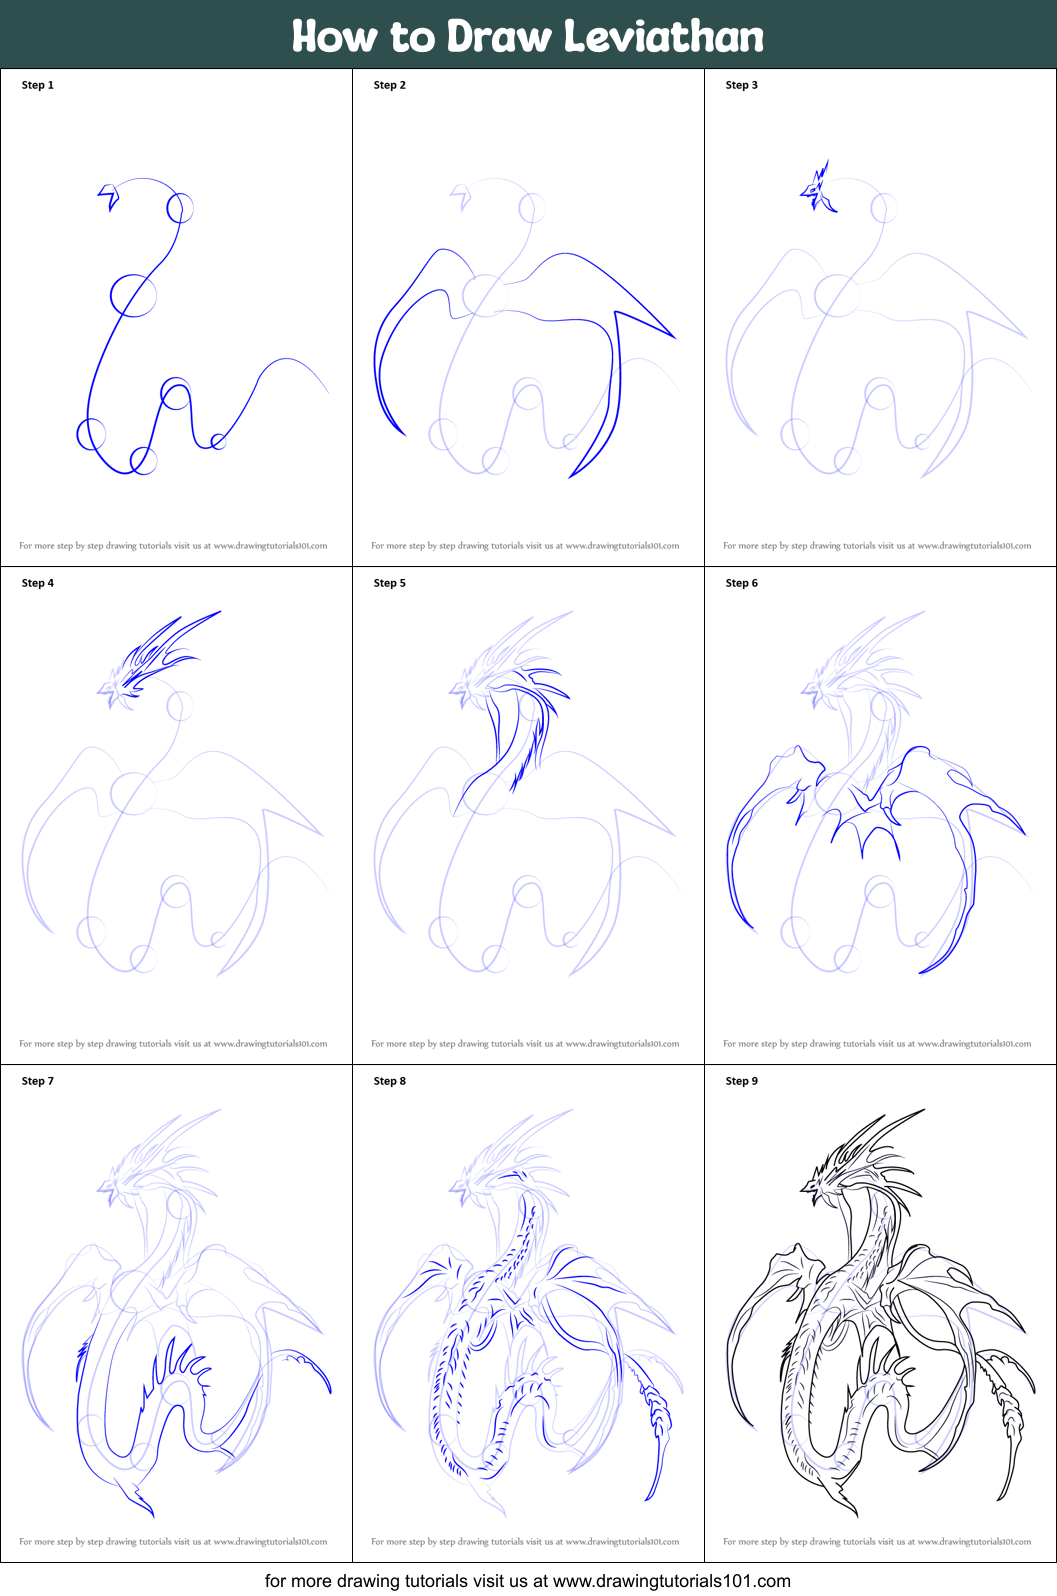 How to Draw Leviathan printable step by step drawing sheet